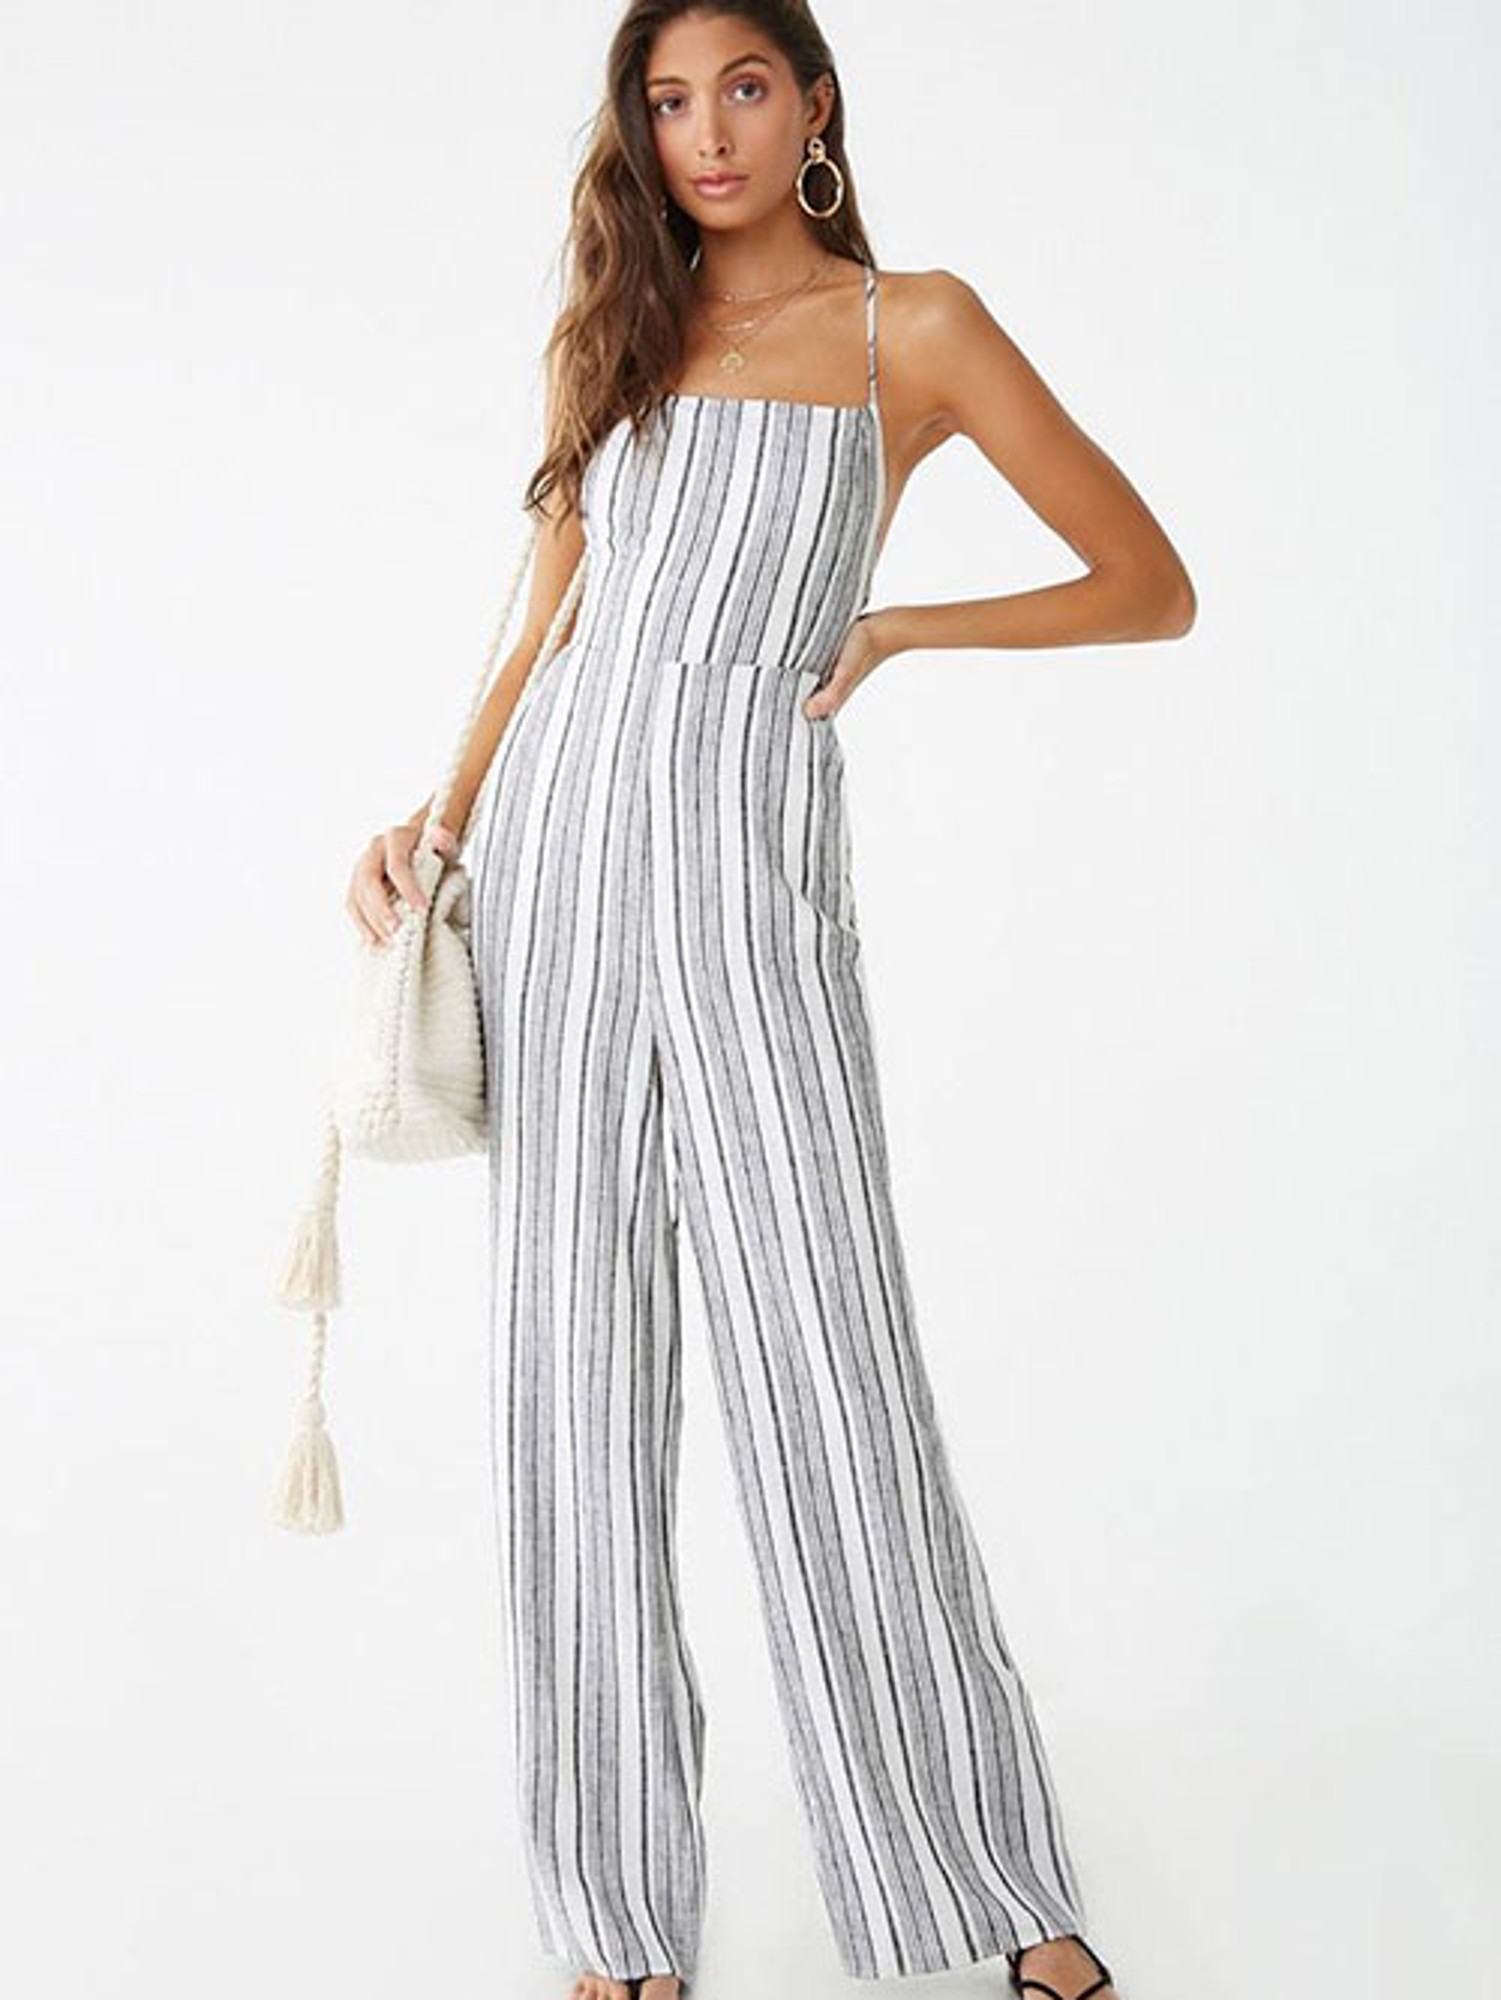 Shop Multicolor Striped Jumpsuit for Women from latest collection at Forever  21  396315